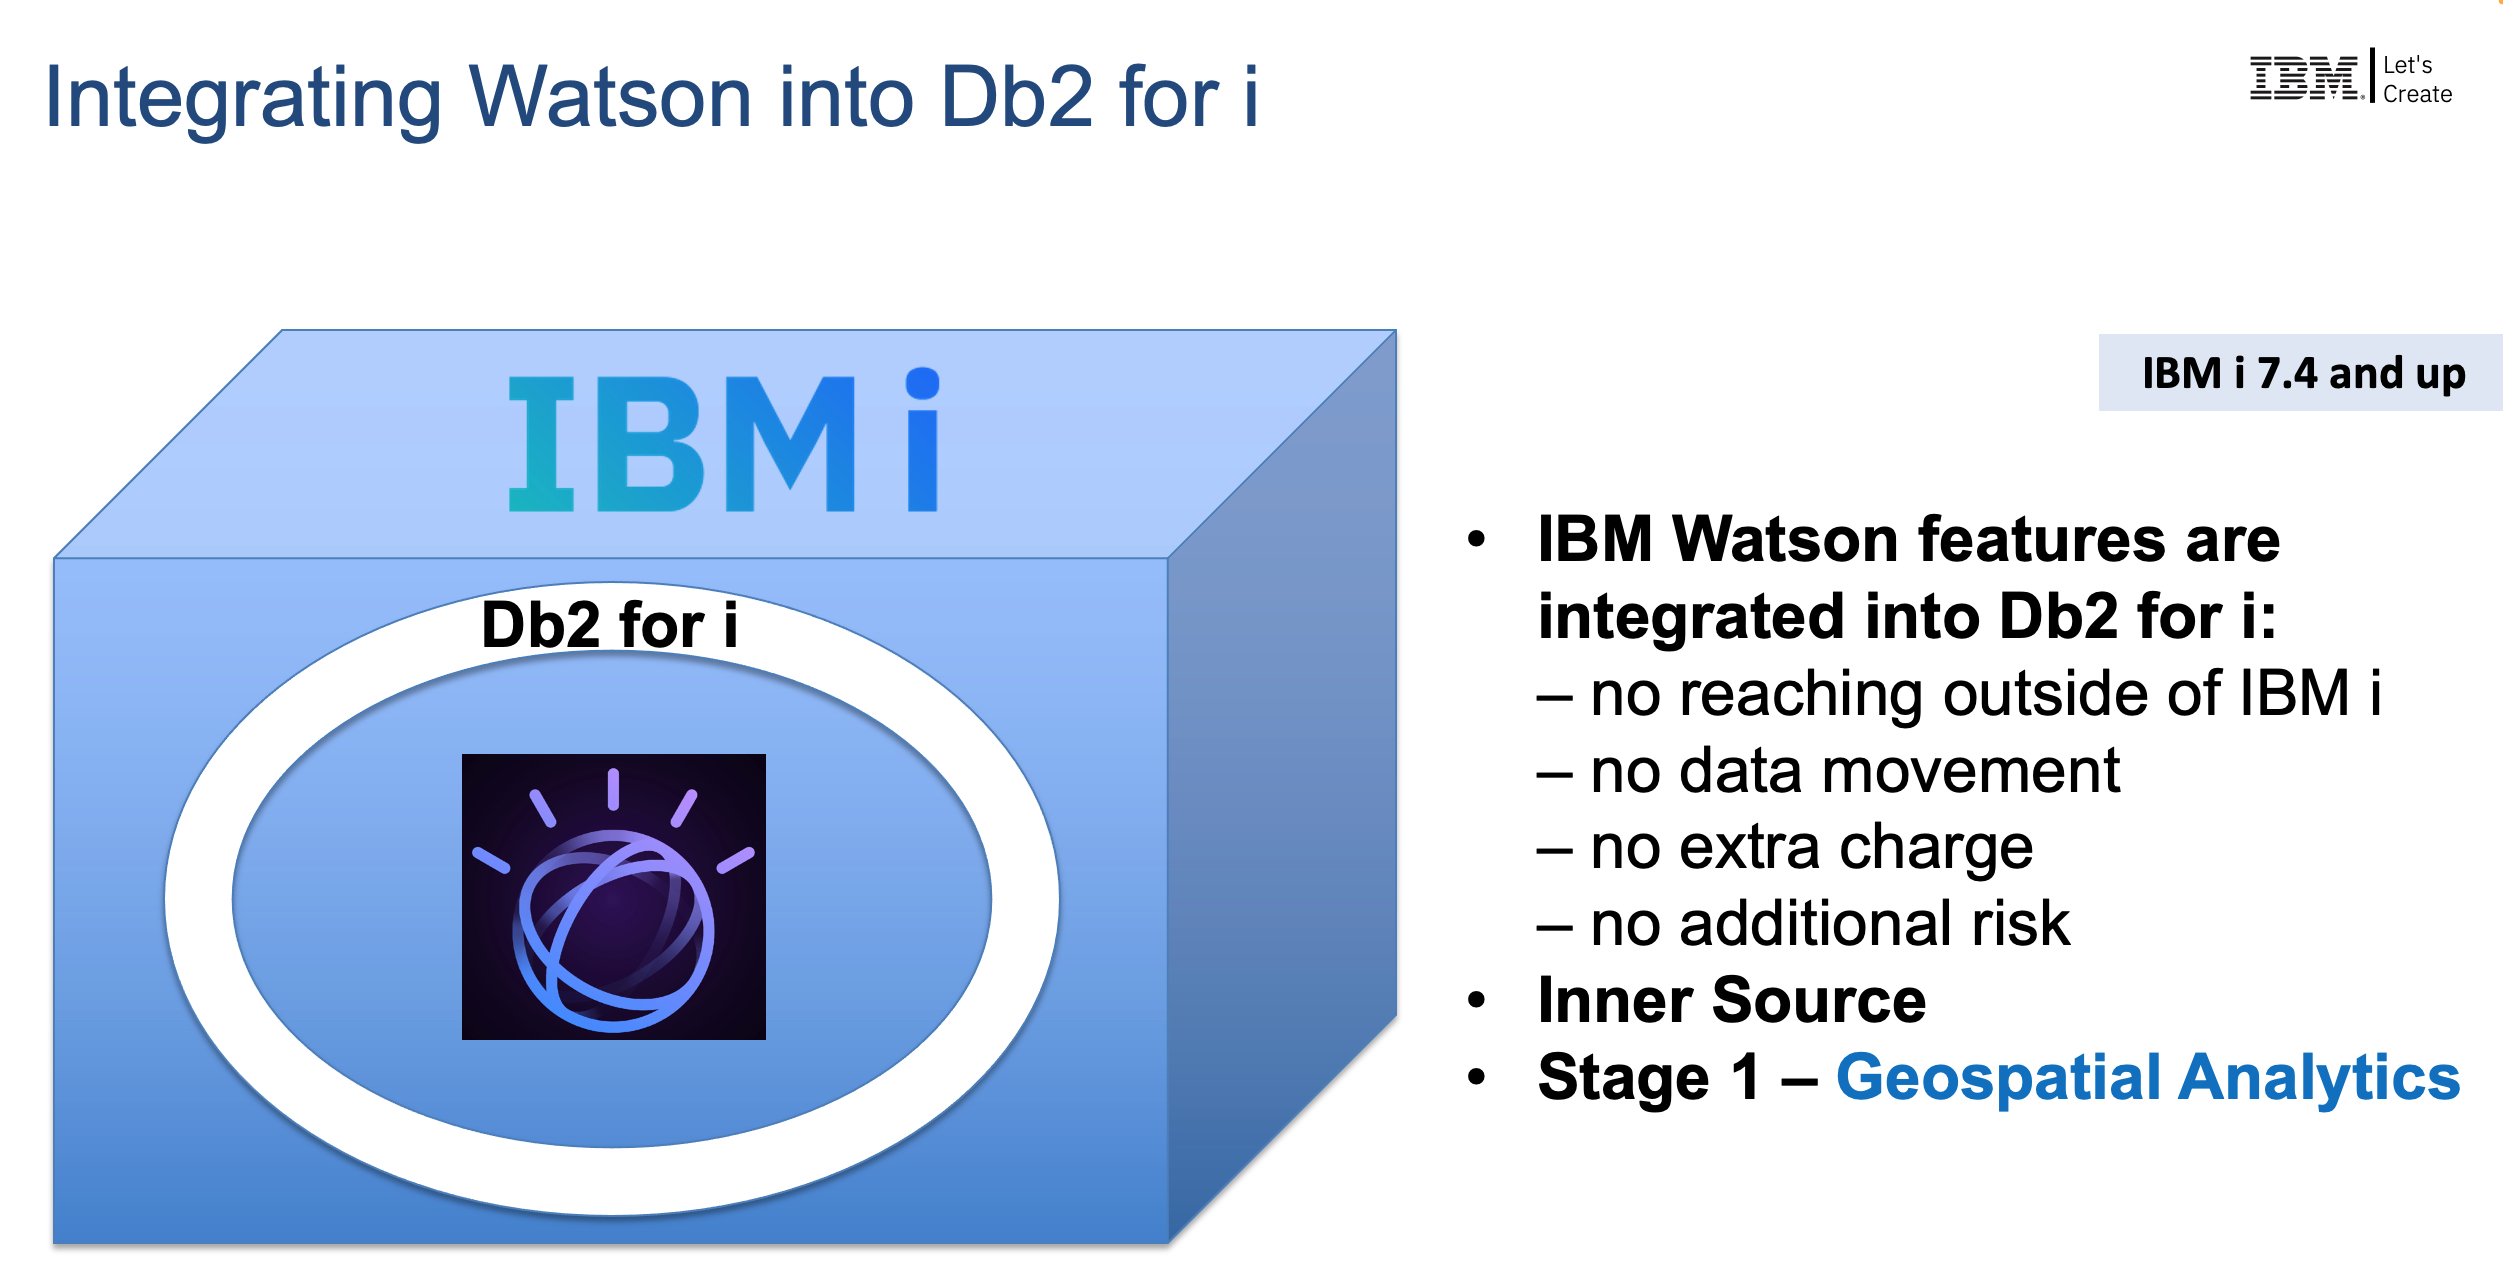 Watson & Db2 for i